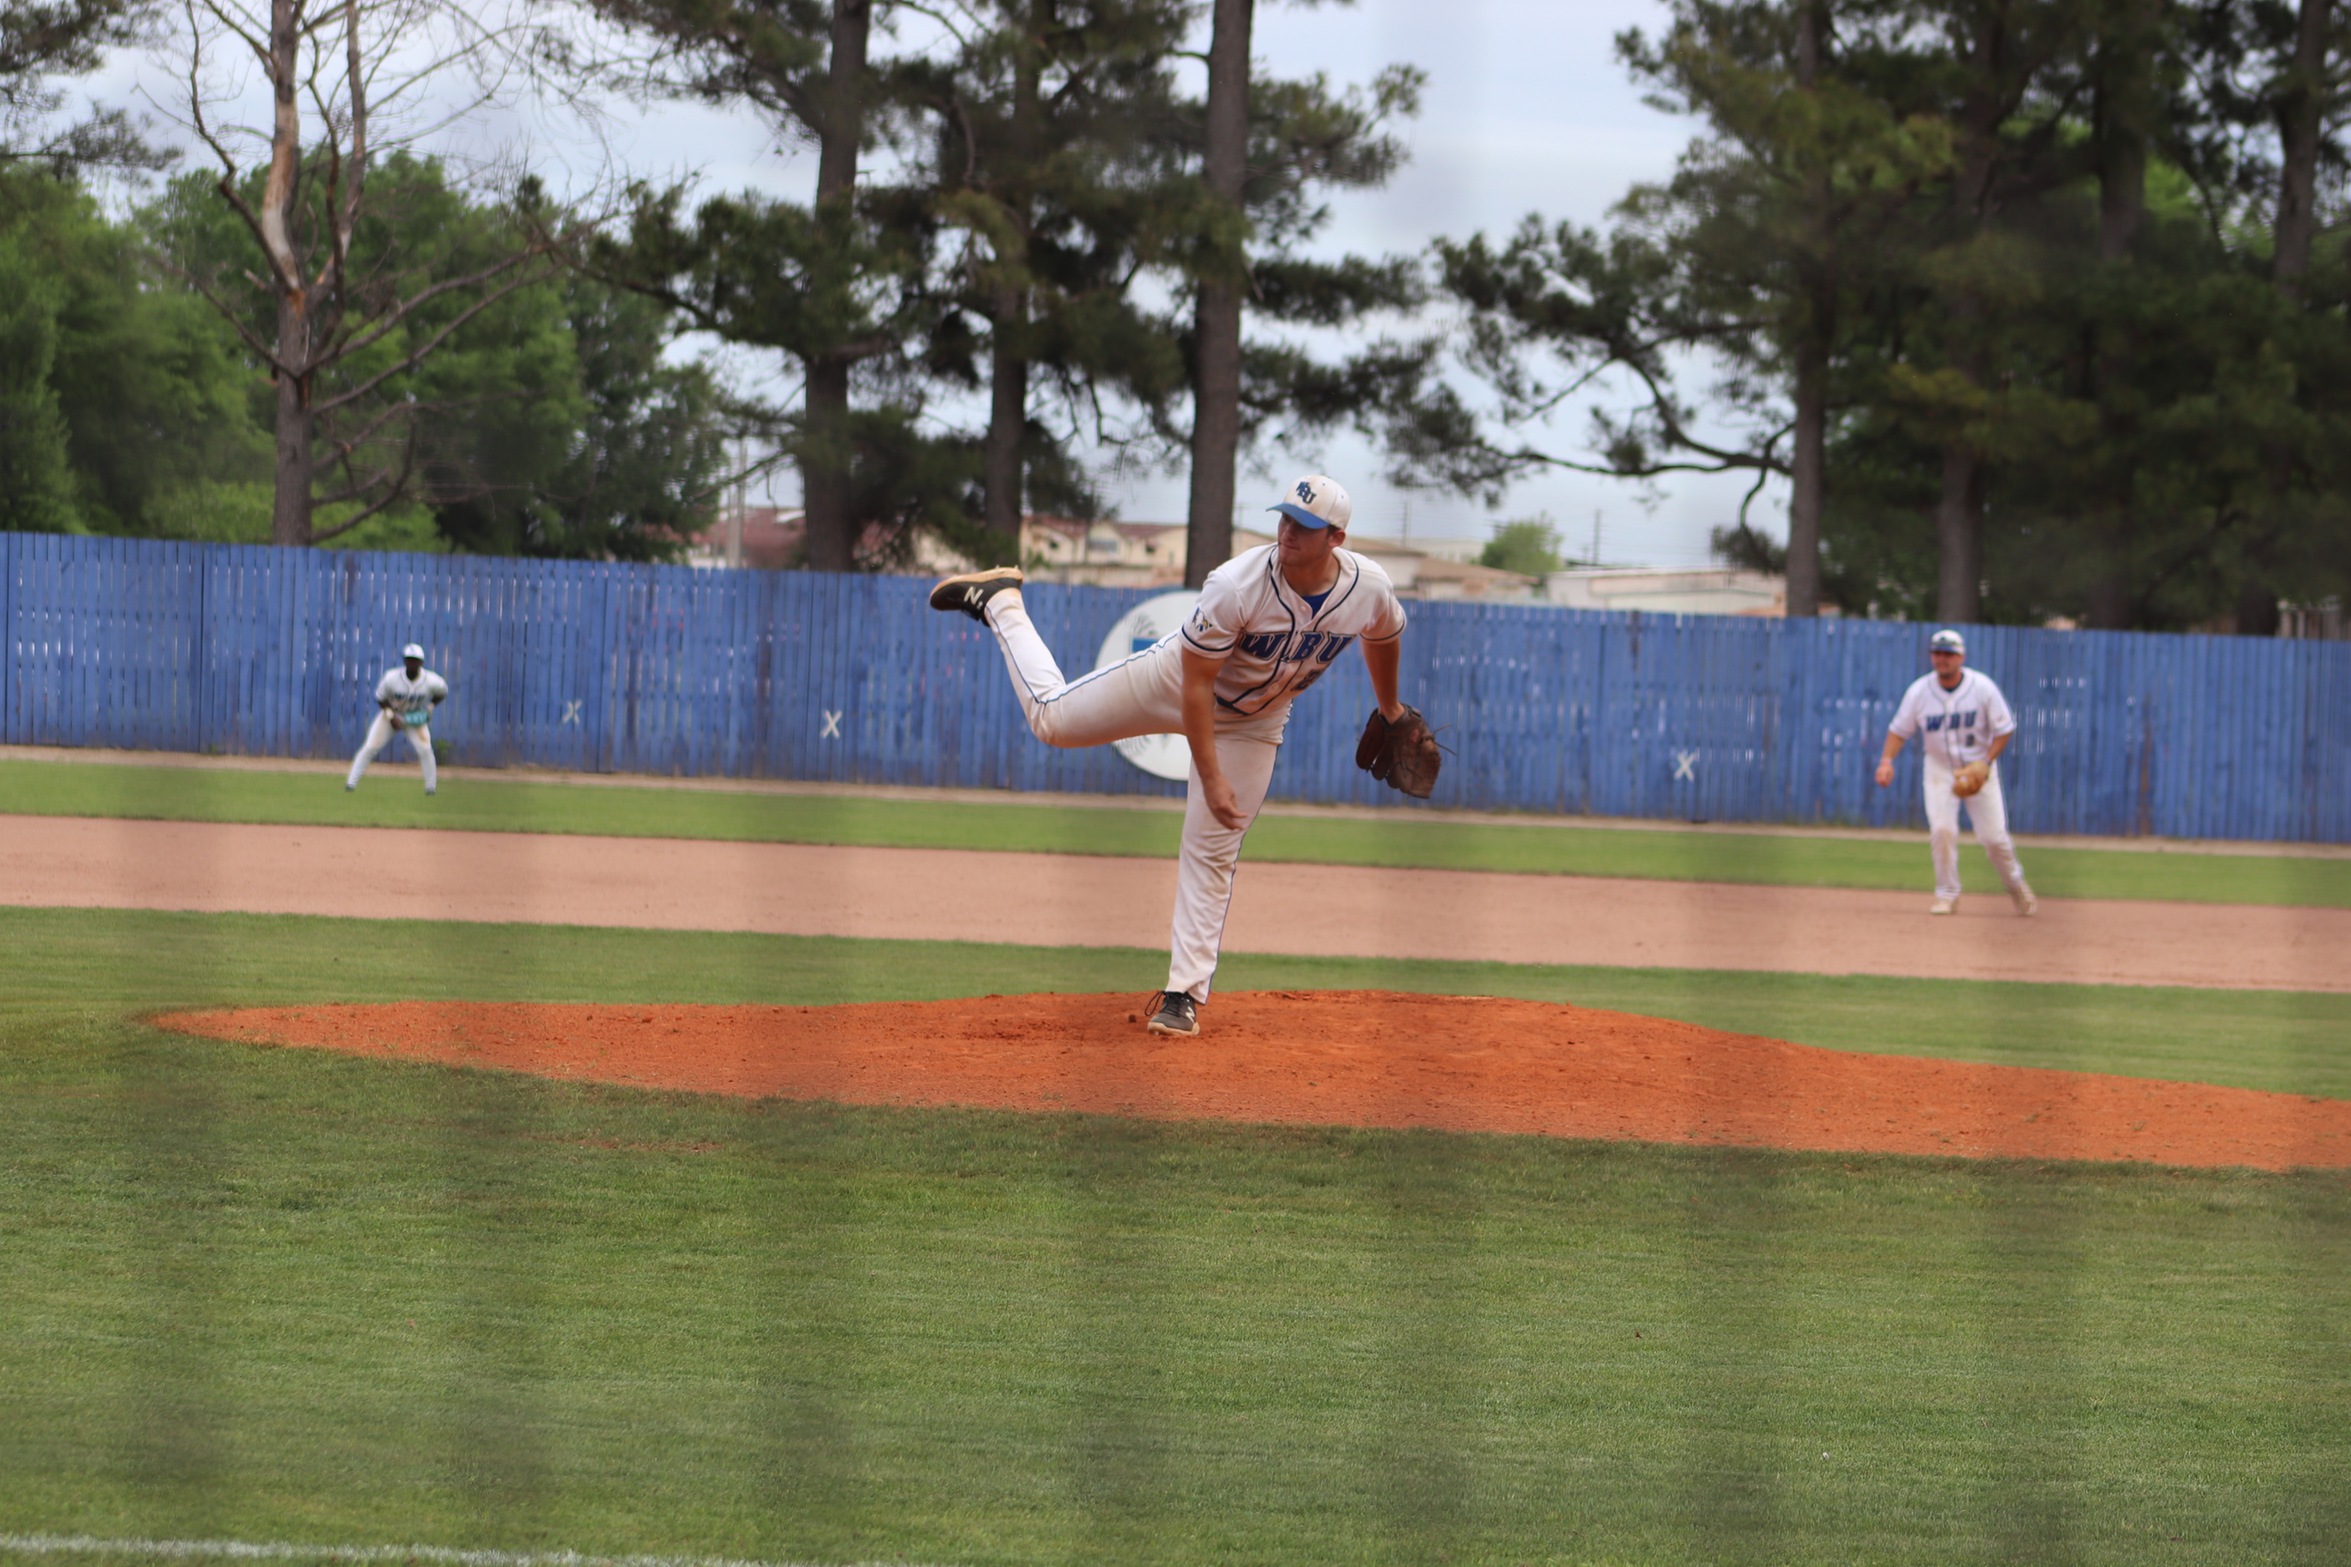 Eagles Fall Short Against Owls in Doubleheader